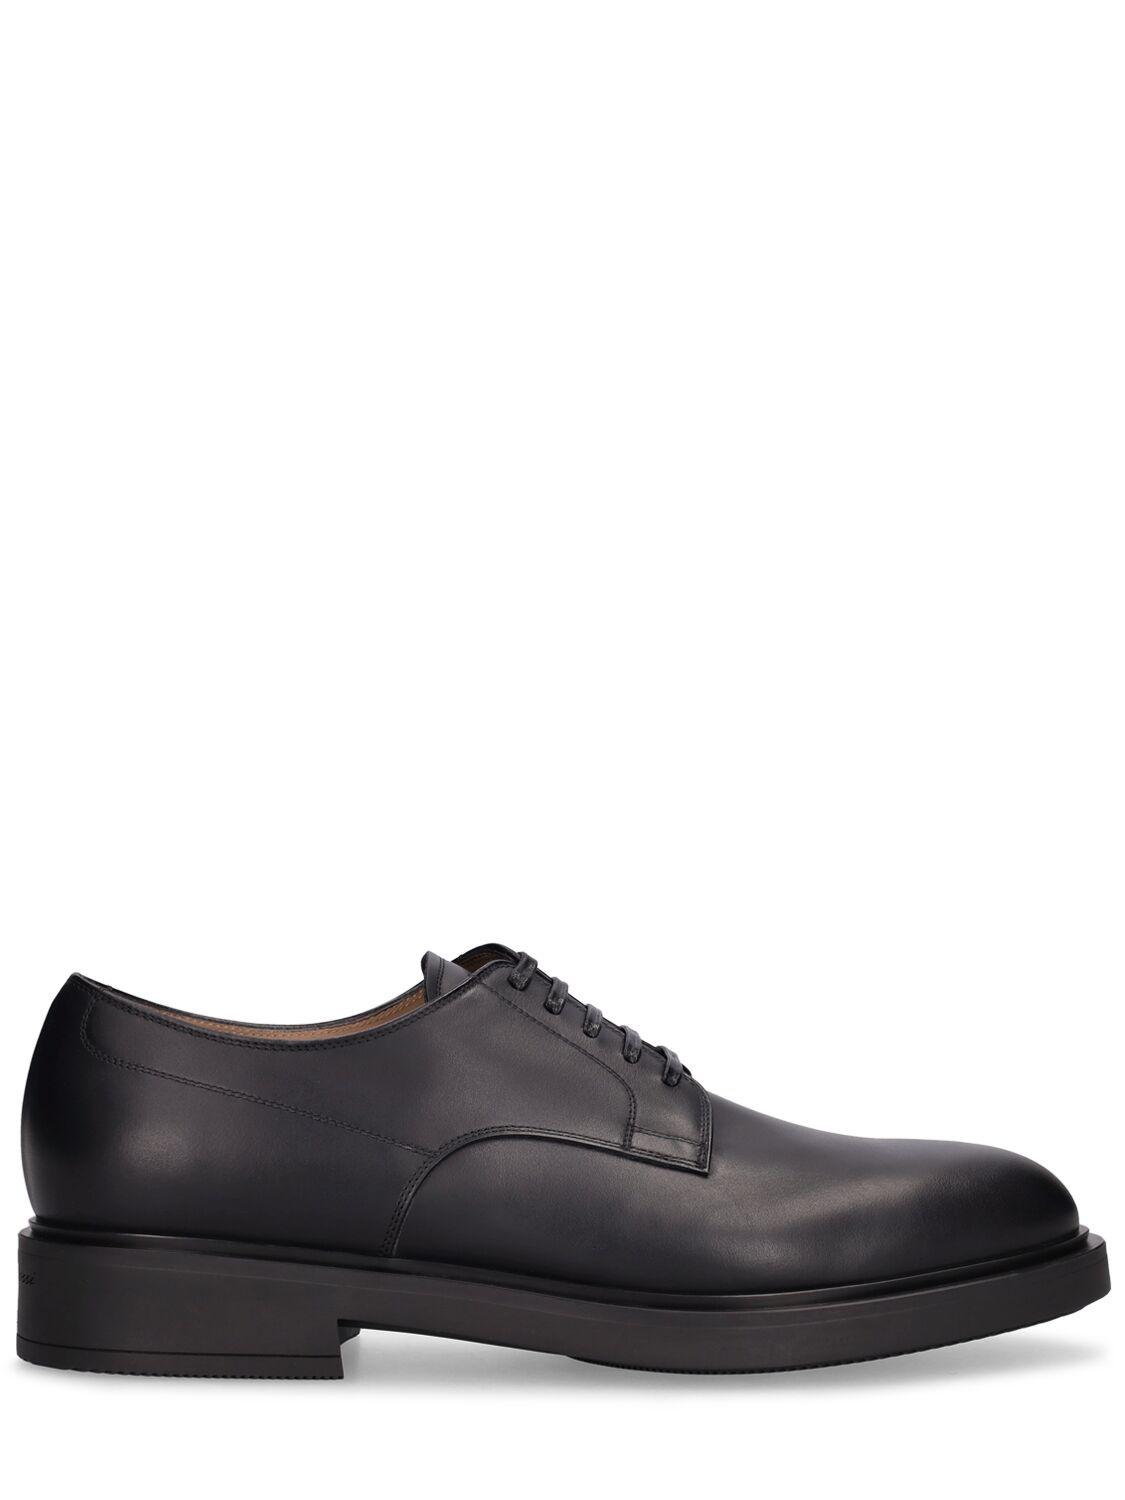 Gianvito Rossi William Leather Lace-up Derby Shoes in Black for Men | Lyst